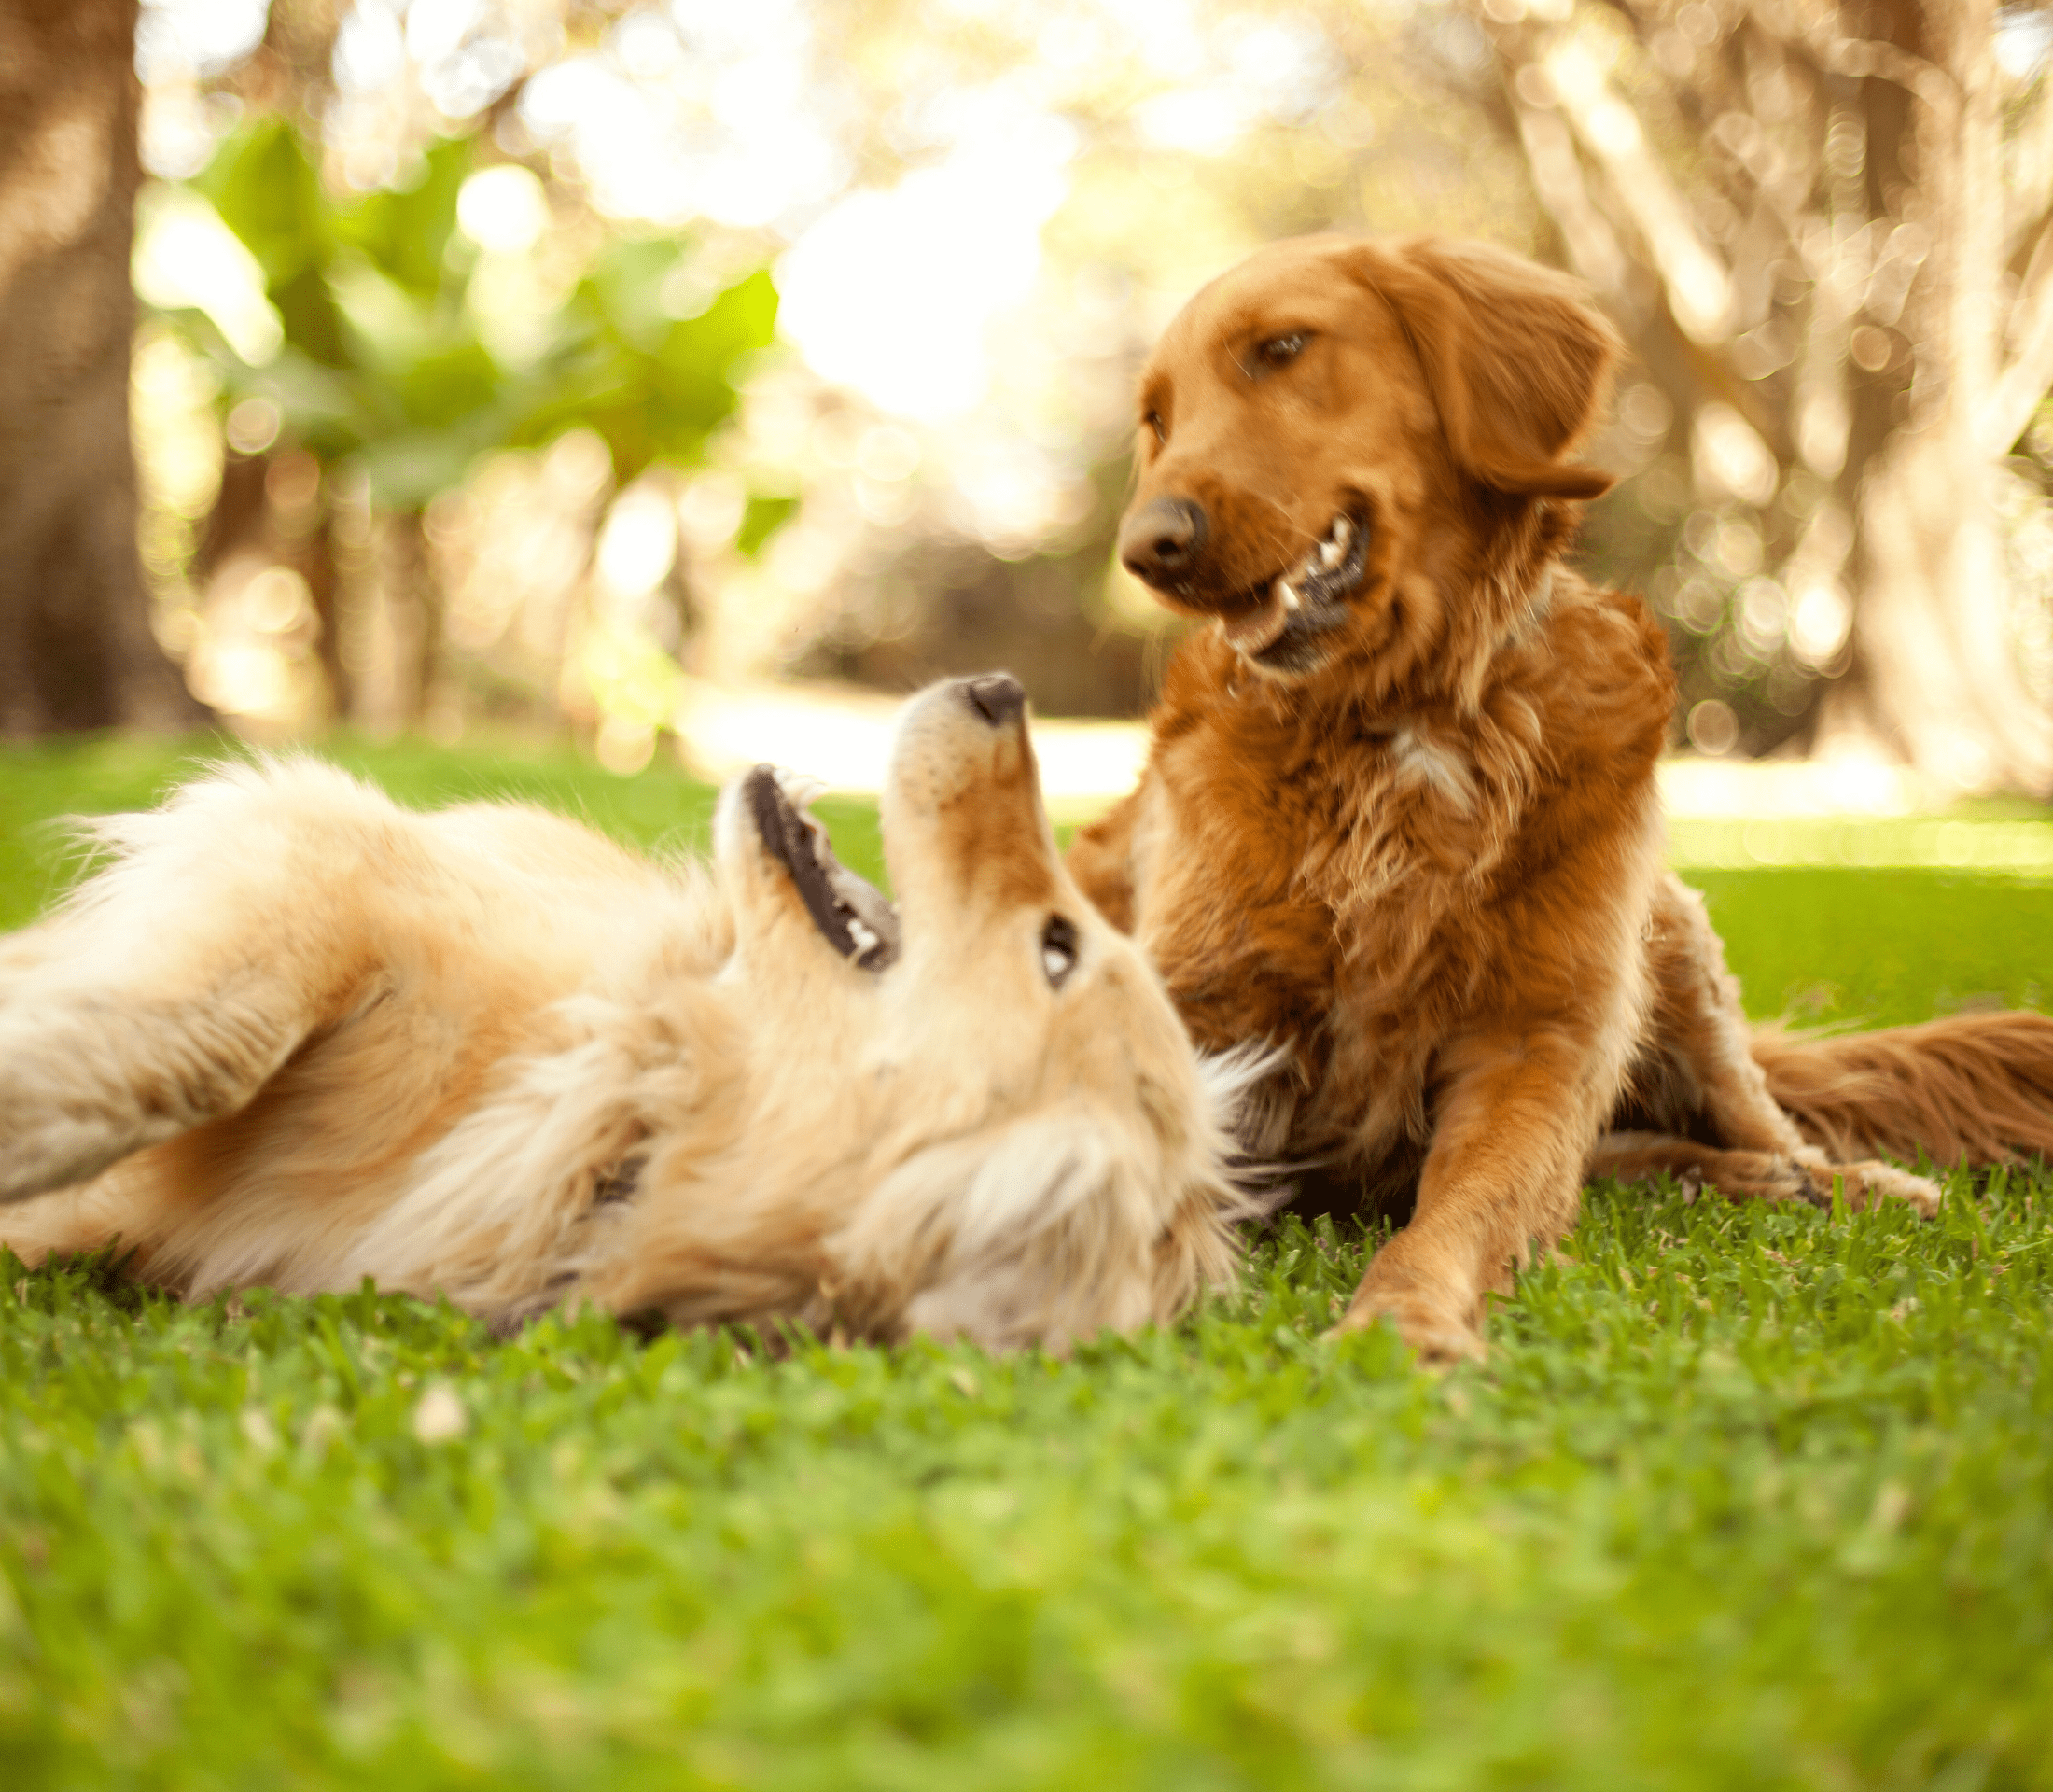 Two adults dog playing under the trees